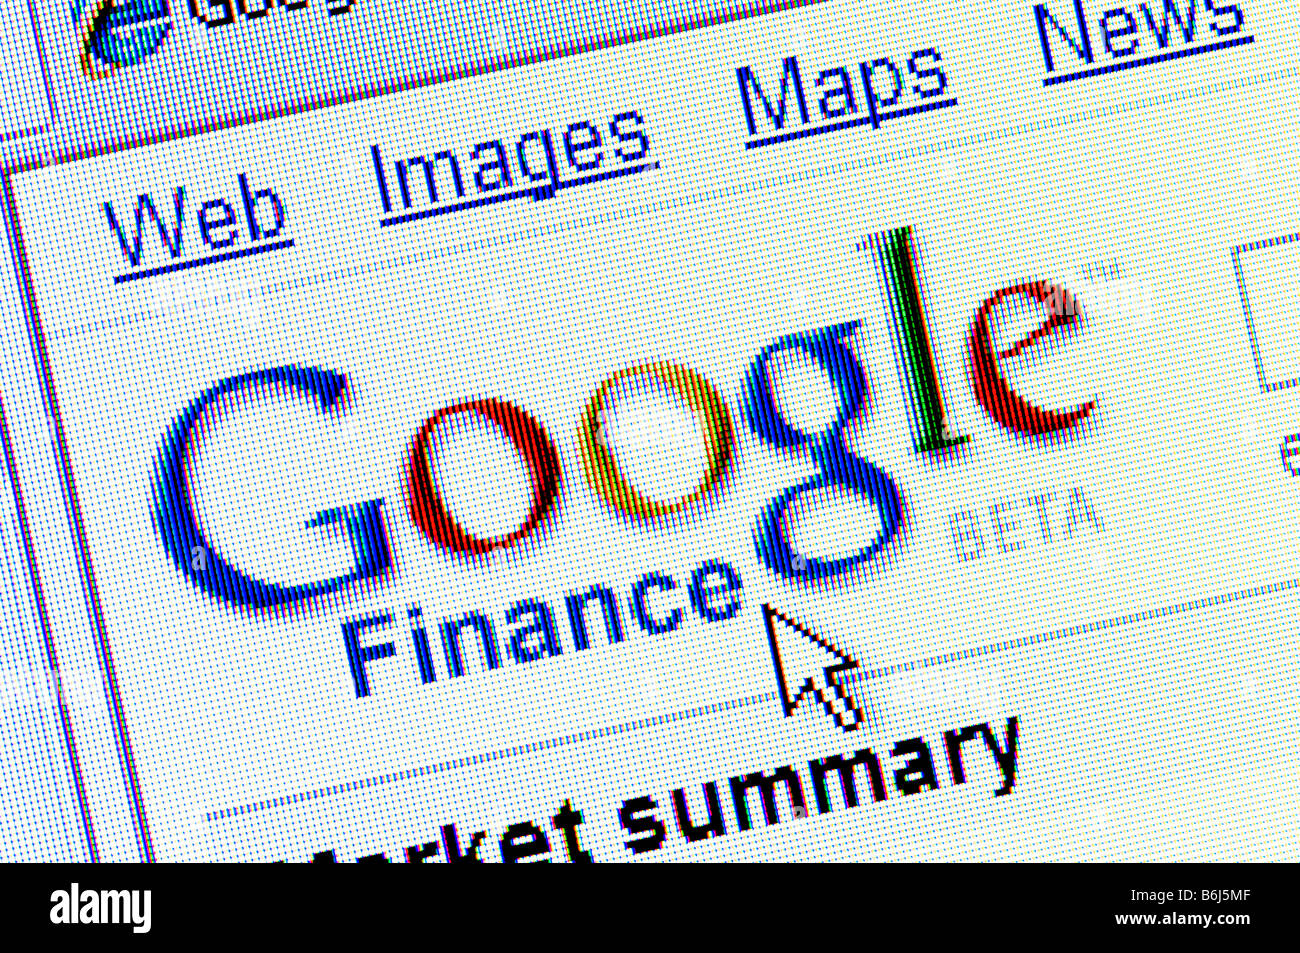 Macro screenshot of Google search engine finance website Editorial use only Stock Photo